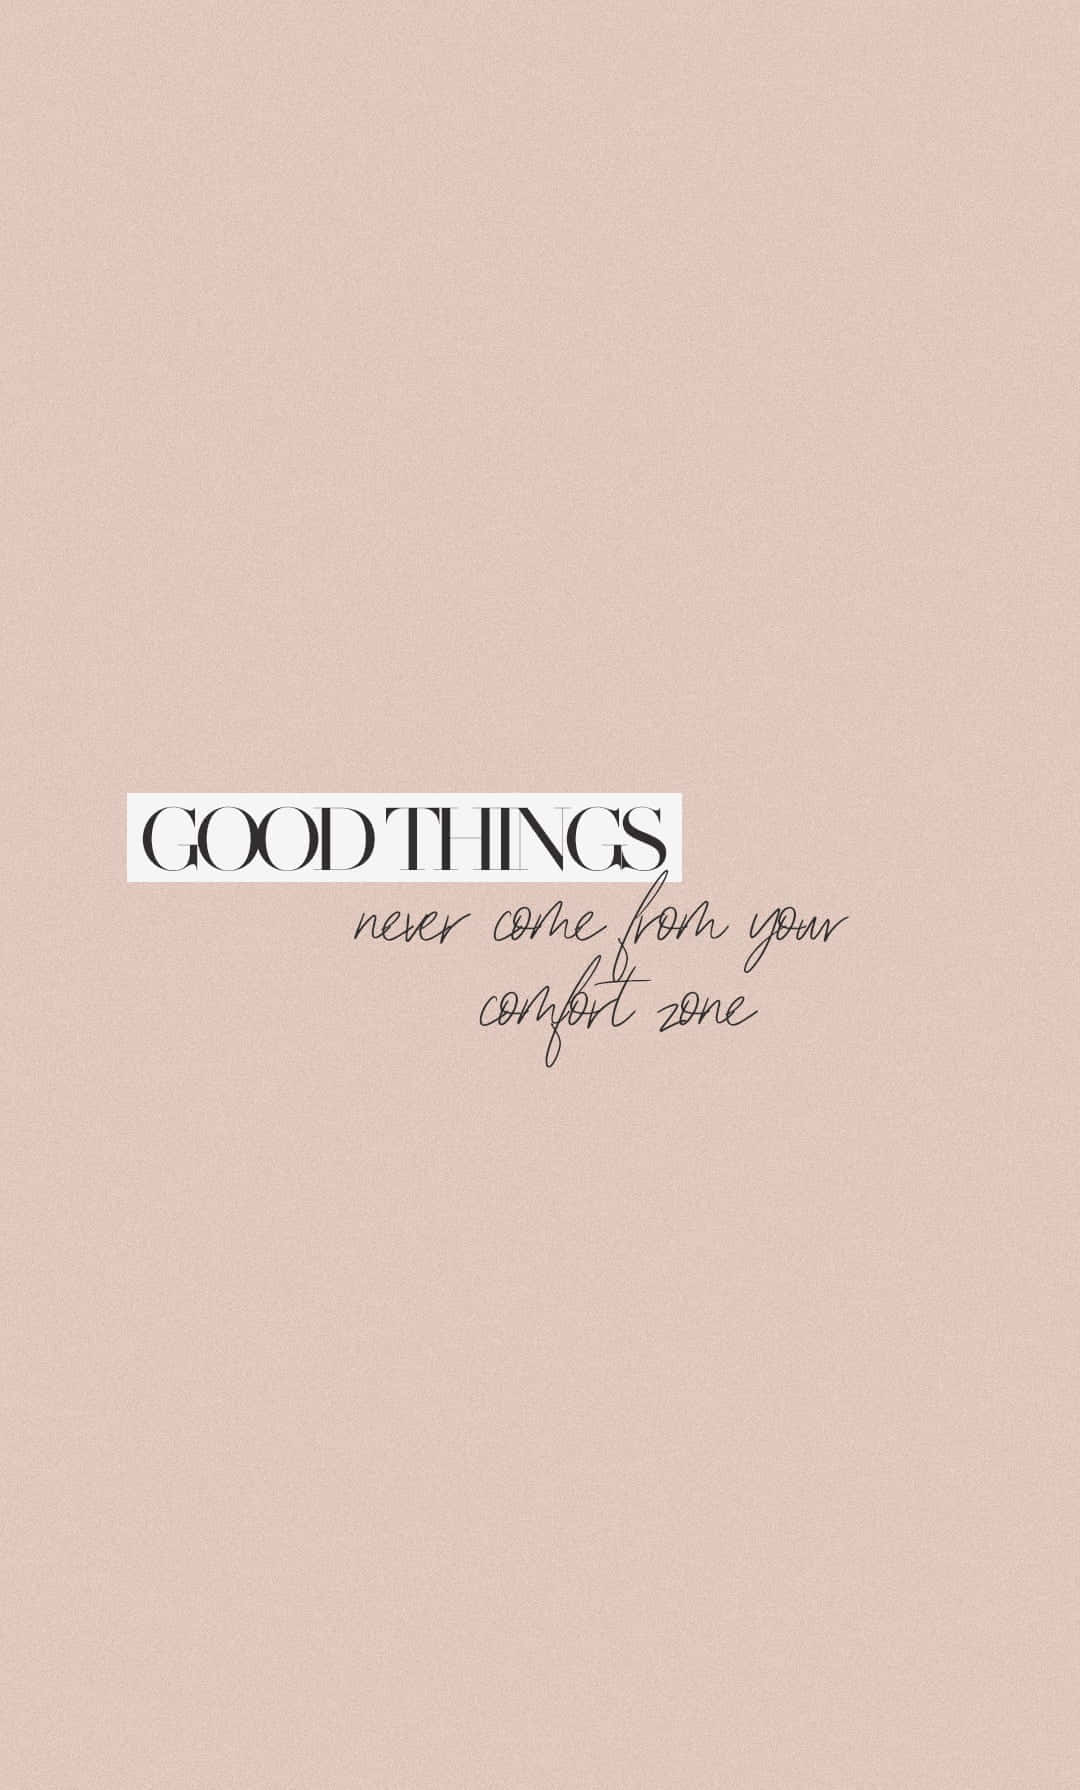 Good Things Comfort Zone Quote Aesthetic Wallpaper